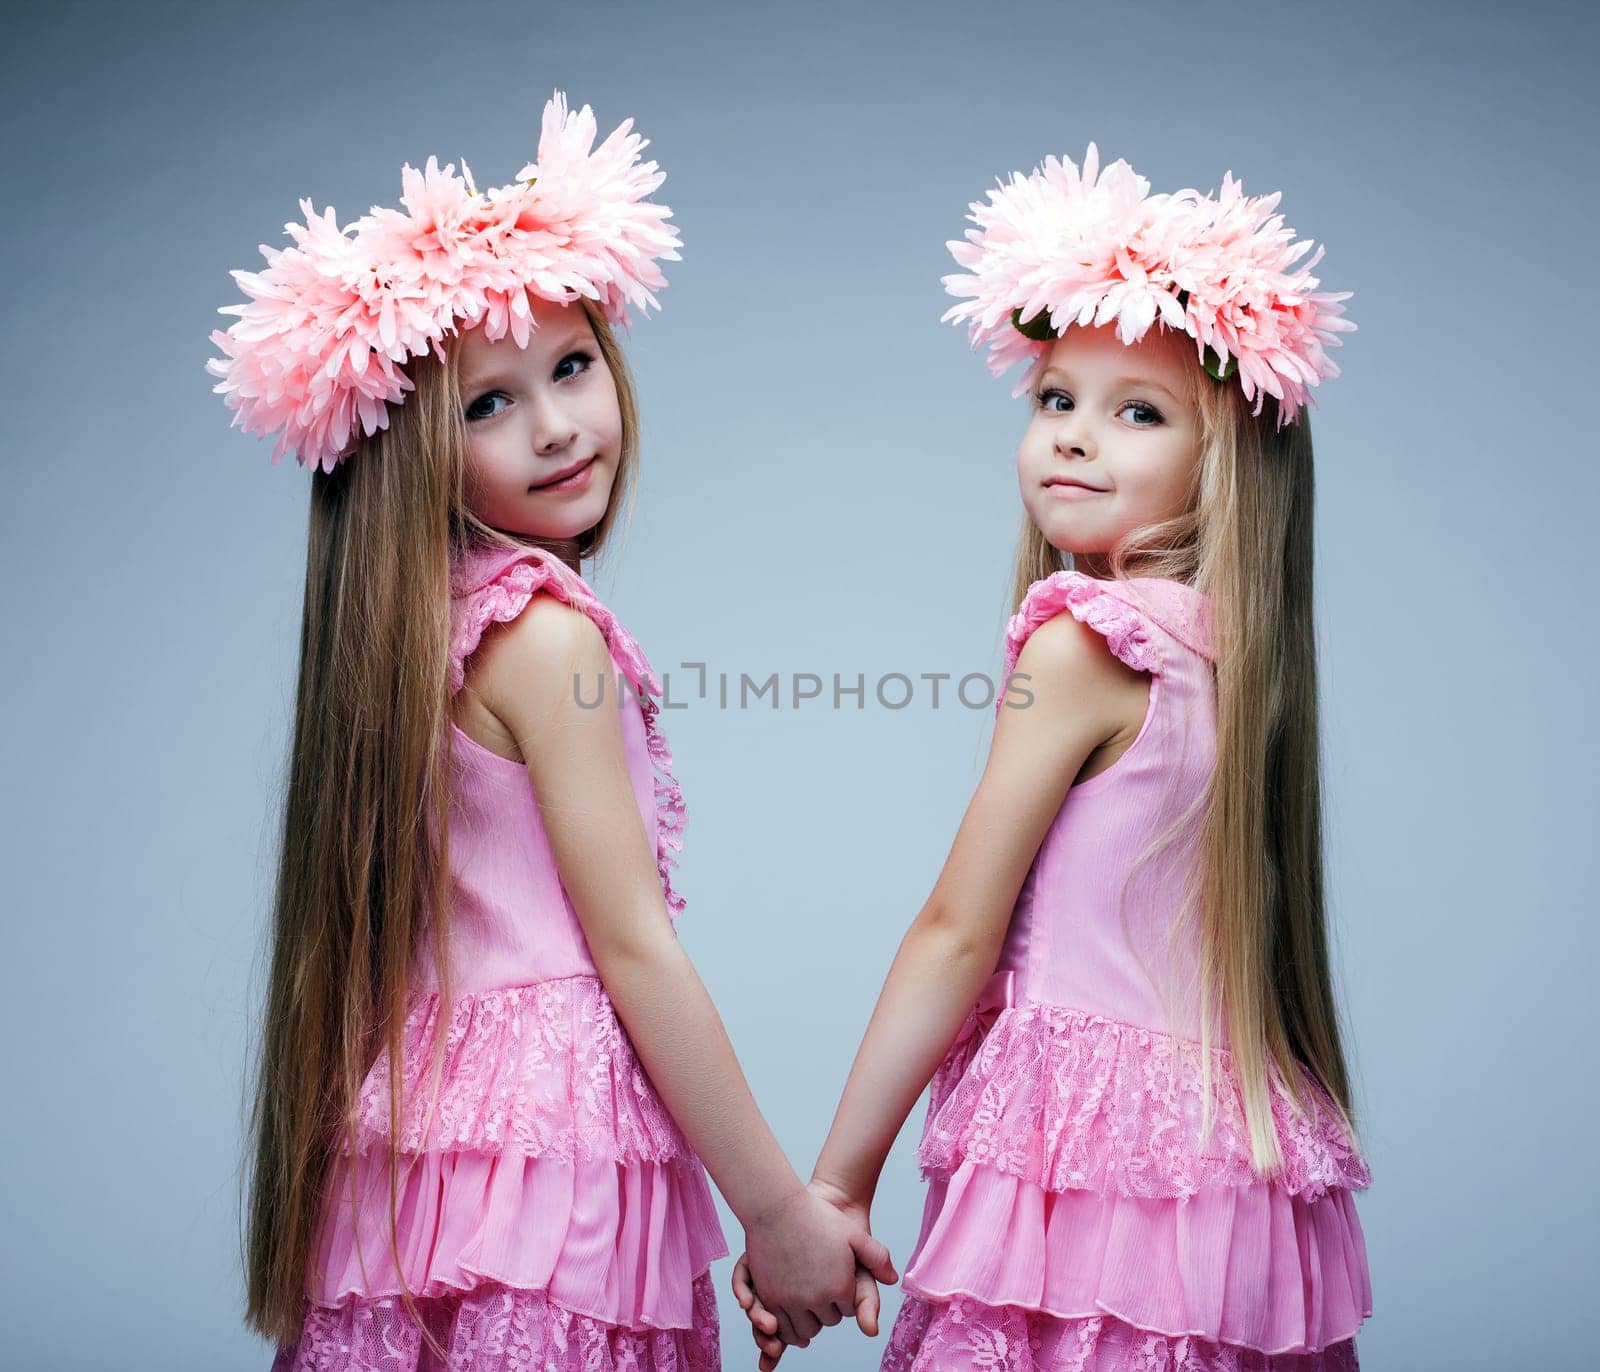 Glamour portrait of little girls in pink dresses